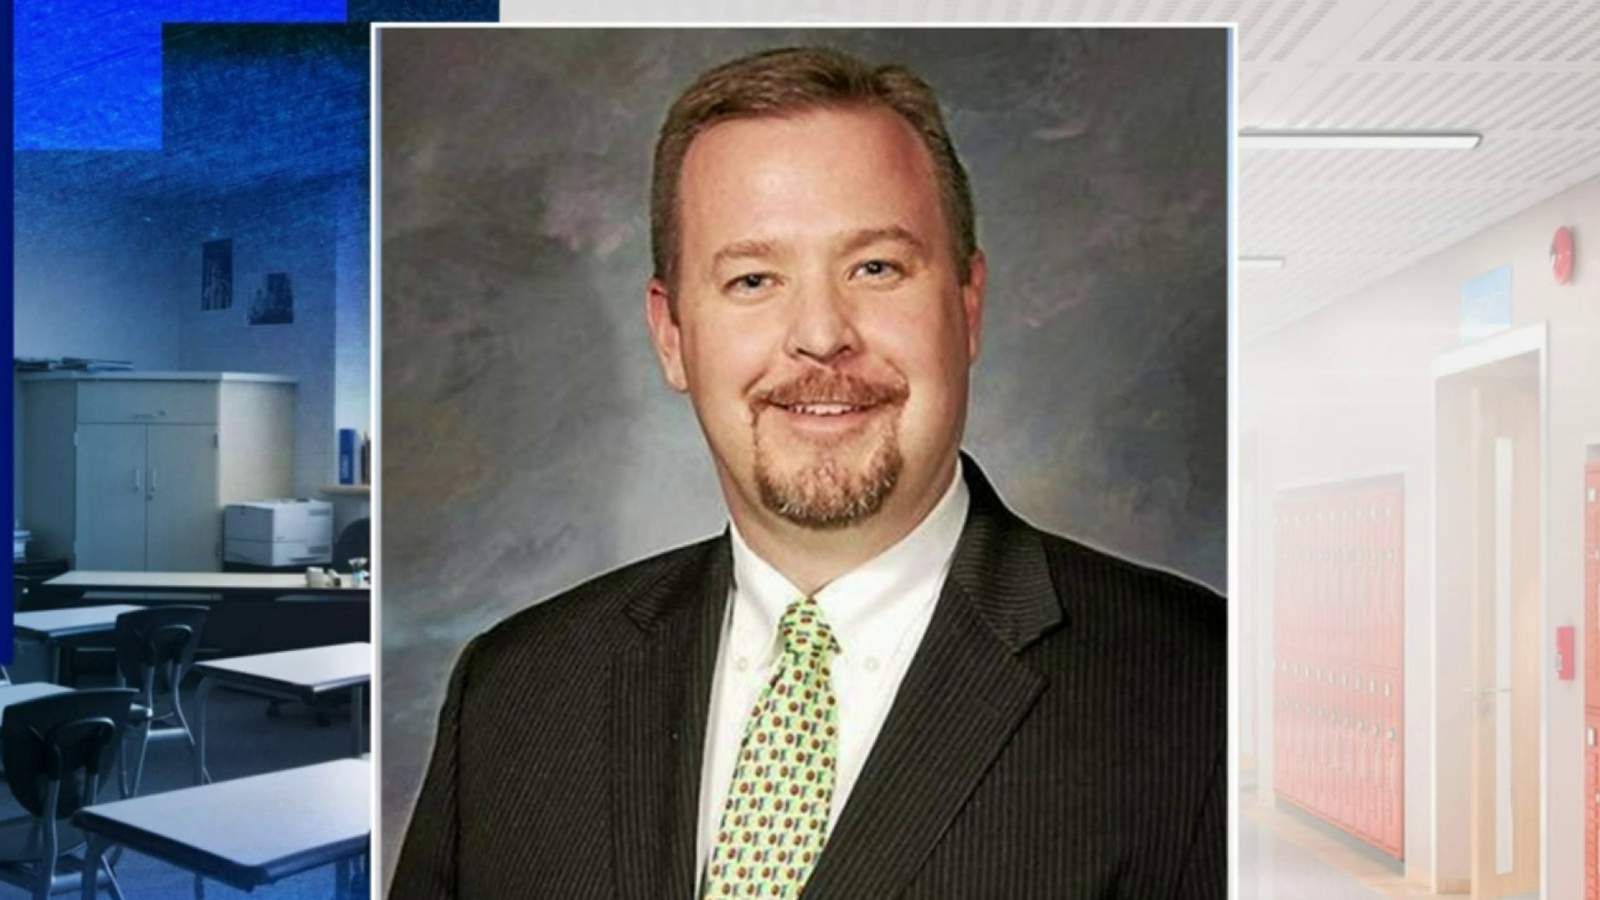 Investigation finds Richmond schools superintendent didn’t violate the law